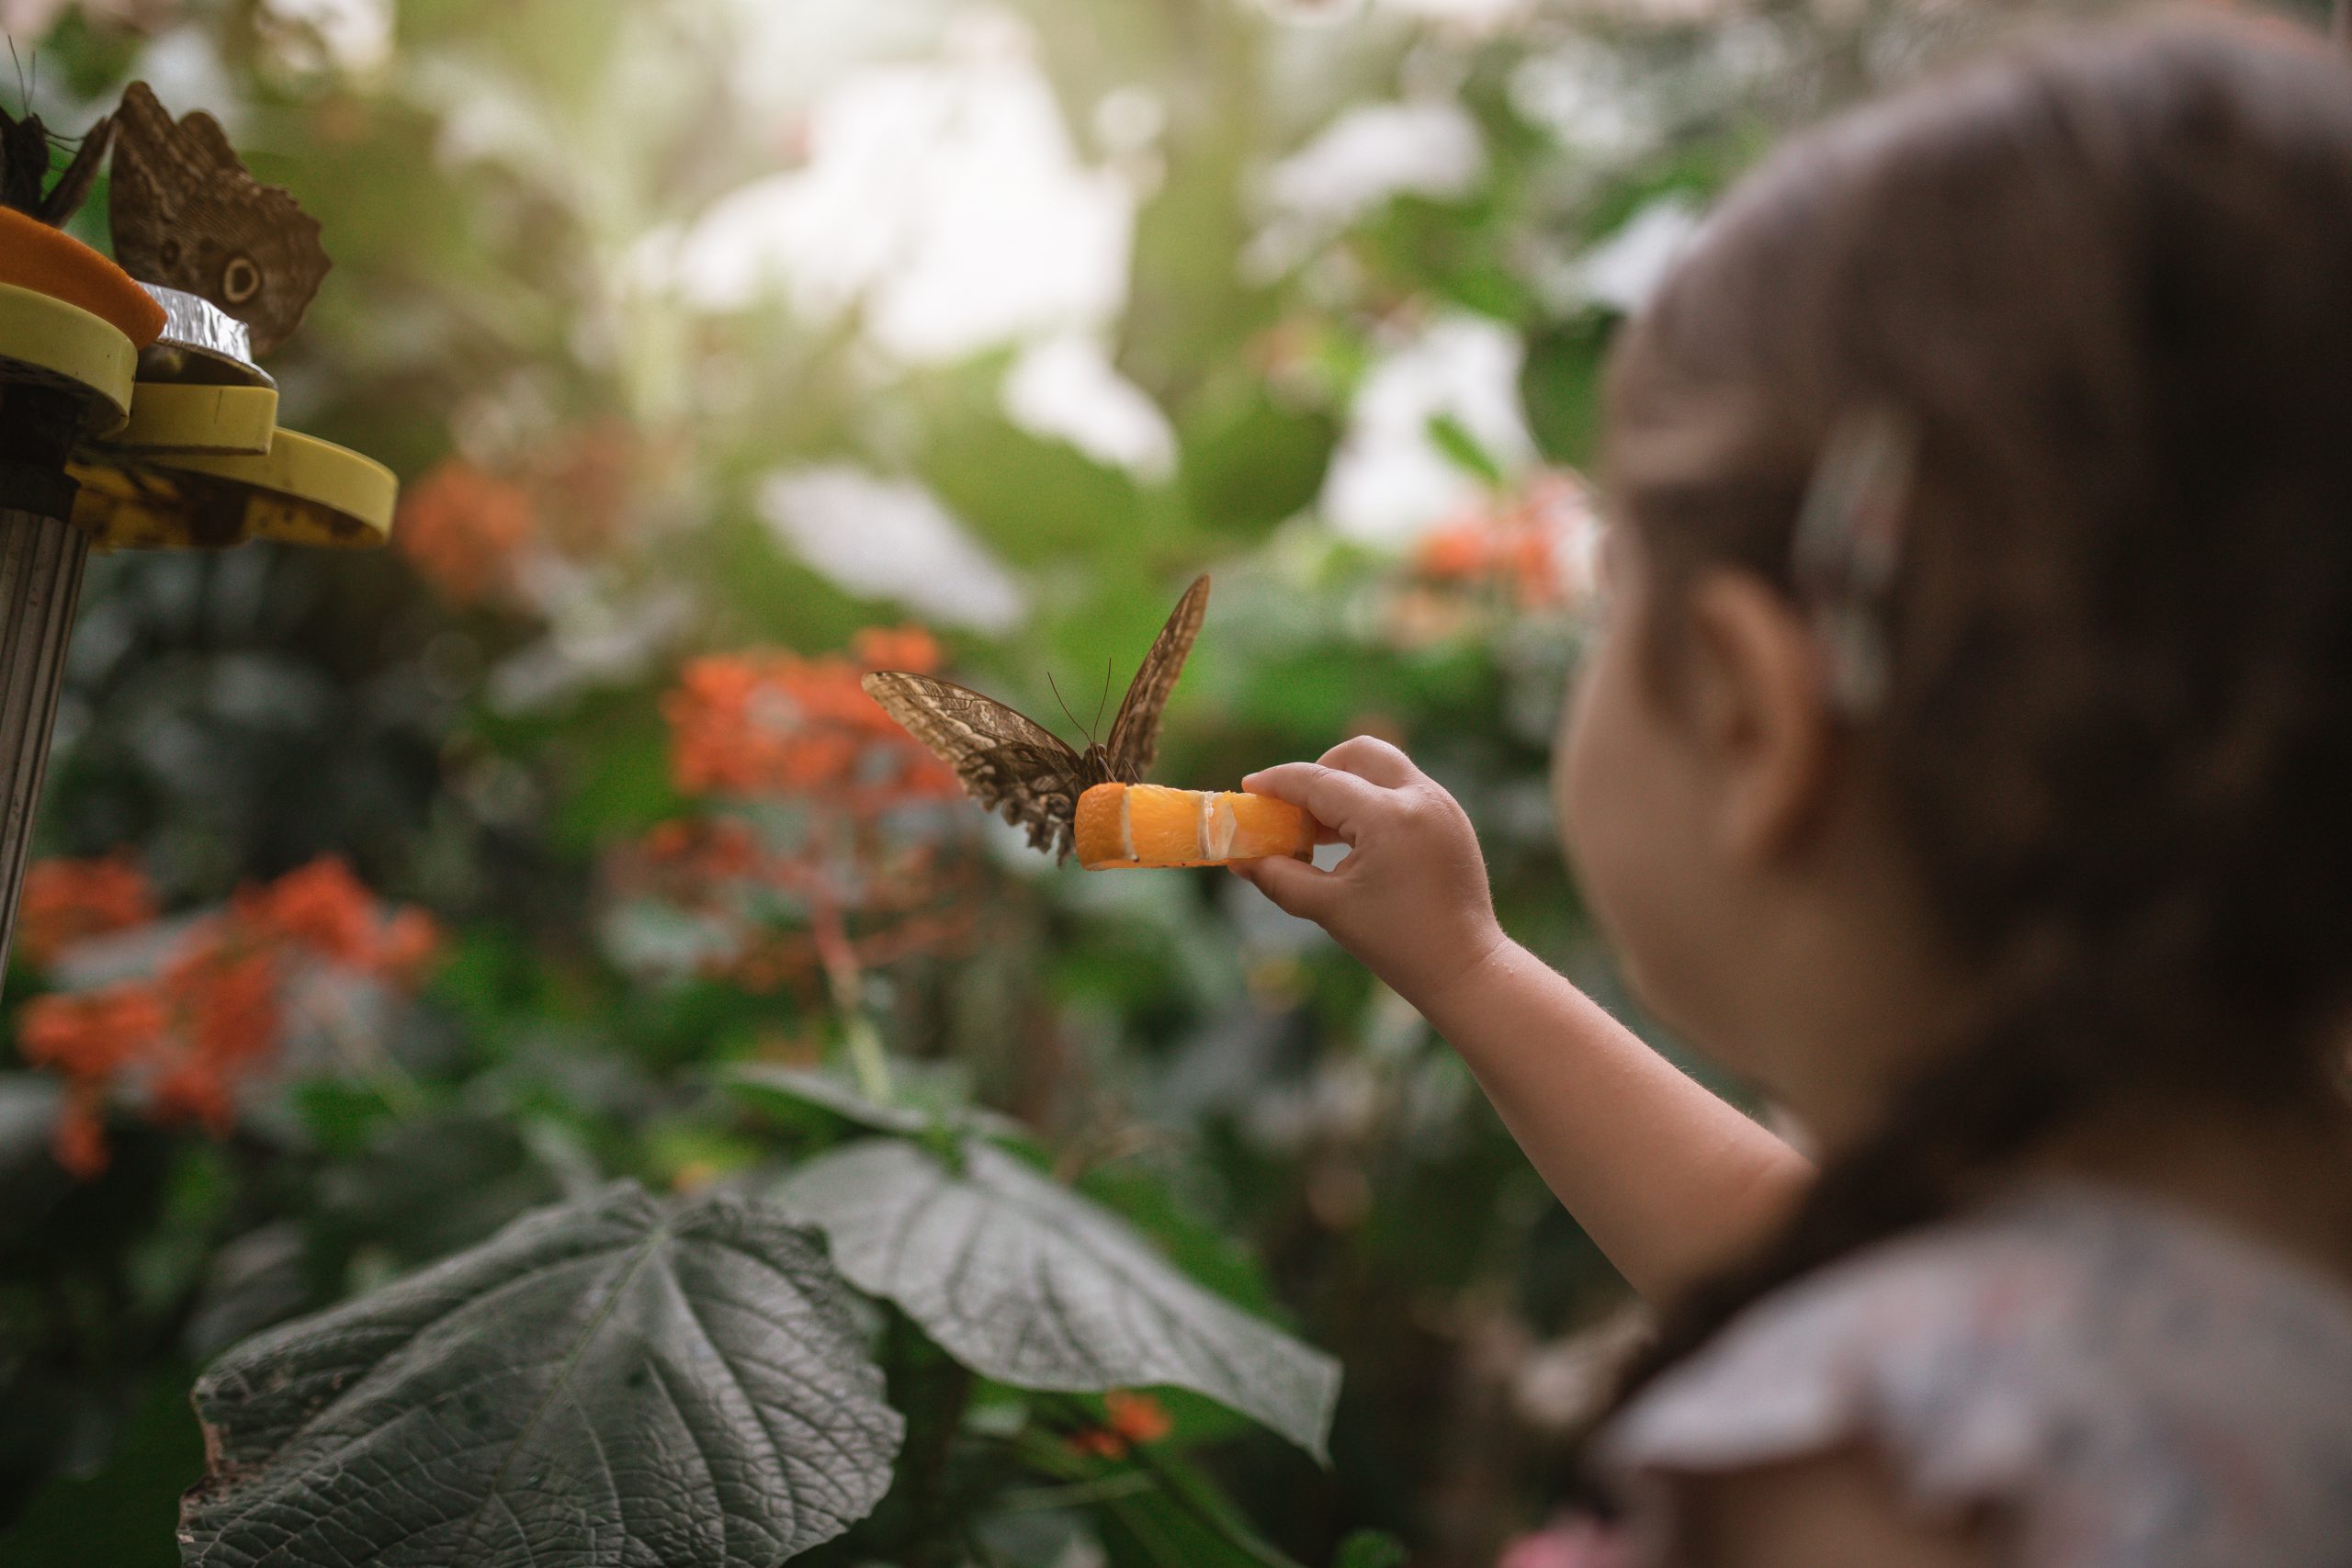 Child, surrounded by plants, is holding a piece of fruit away from their body. A butterfly sits on the fruit.